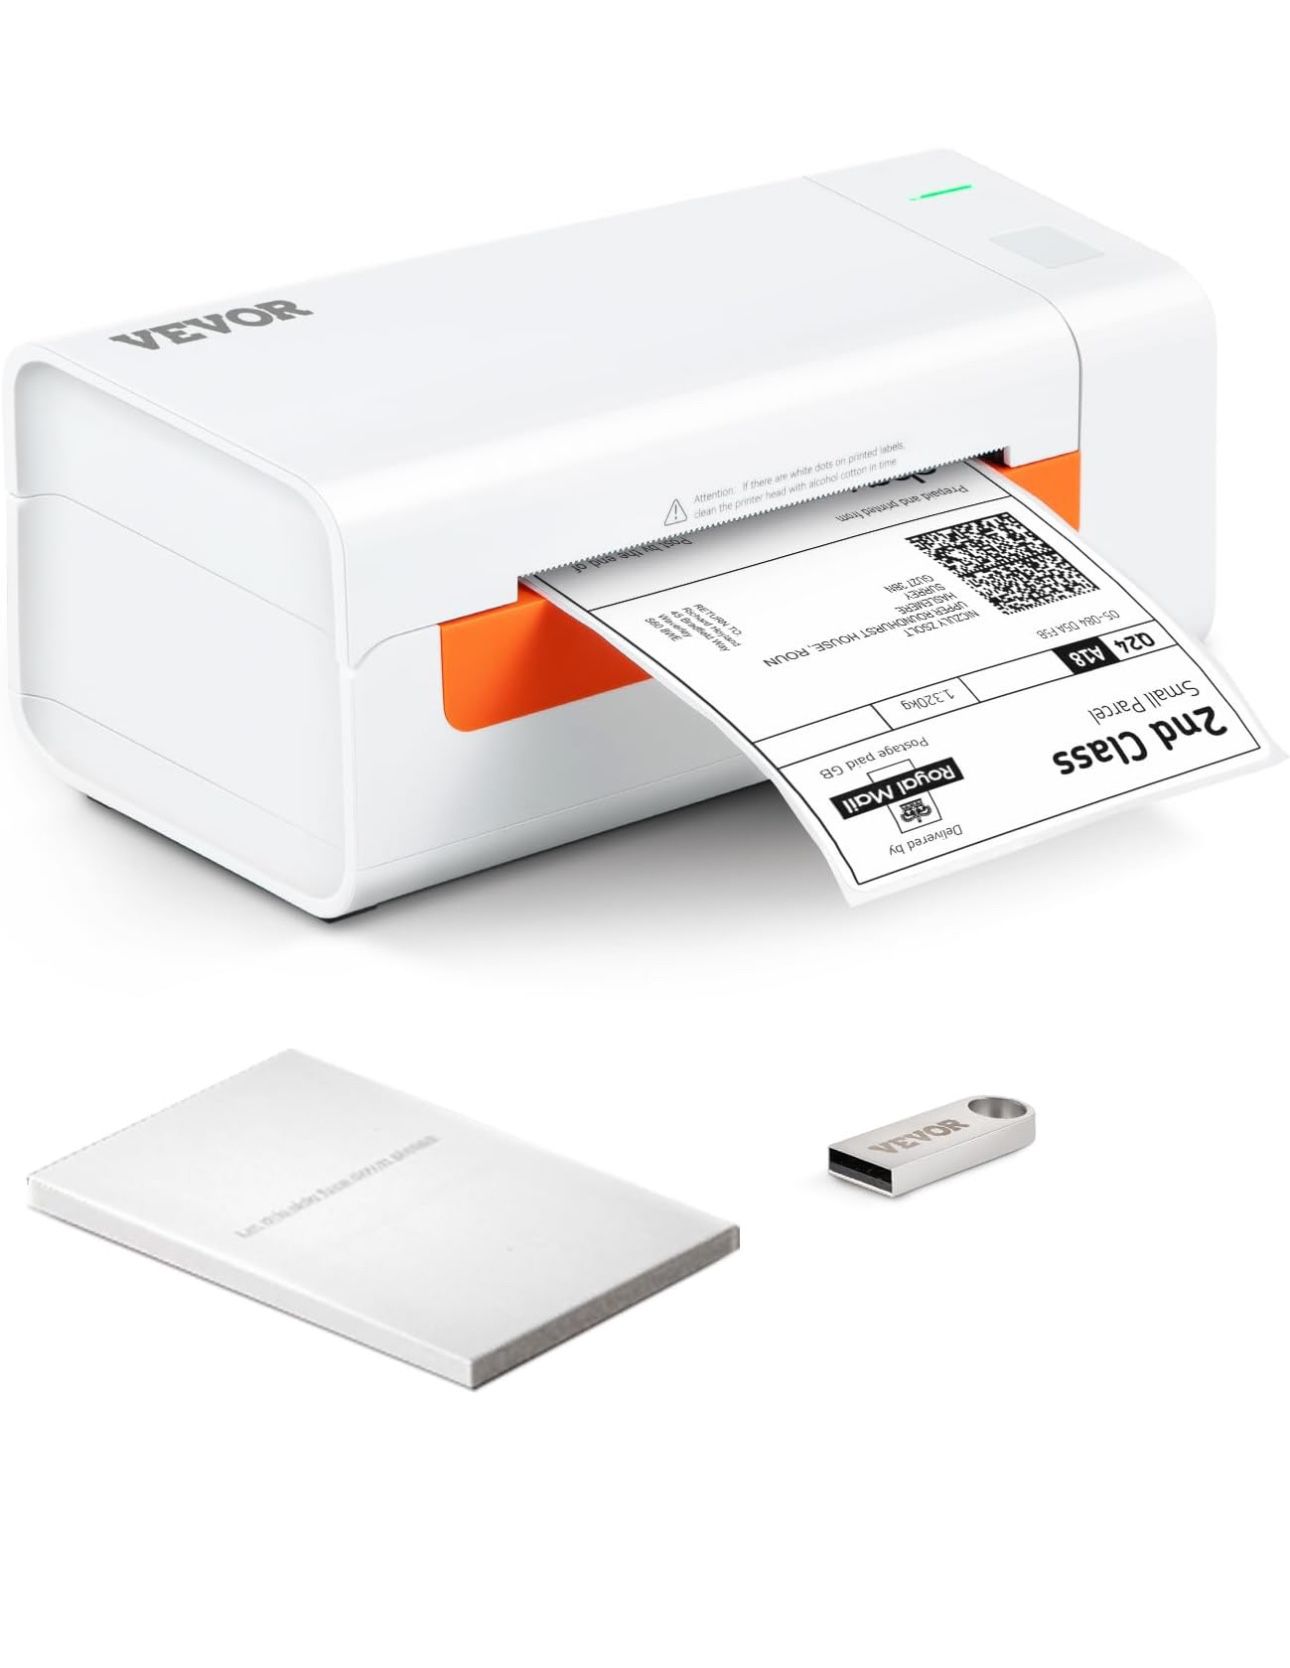 New In Box VEVOR Thermal Label Printer, Shipping Label Printer for 4" x 6" Labels, USB Connection & Automatic Label Recognition, Support Windows/MacOS